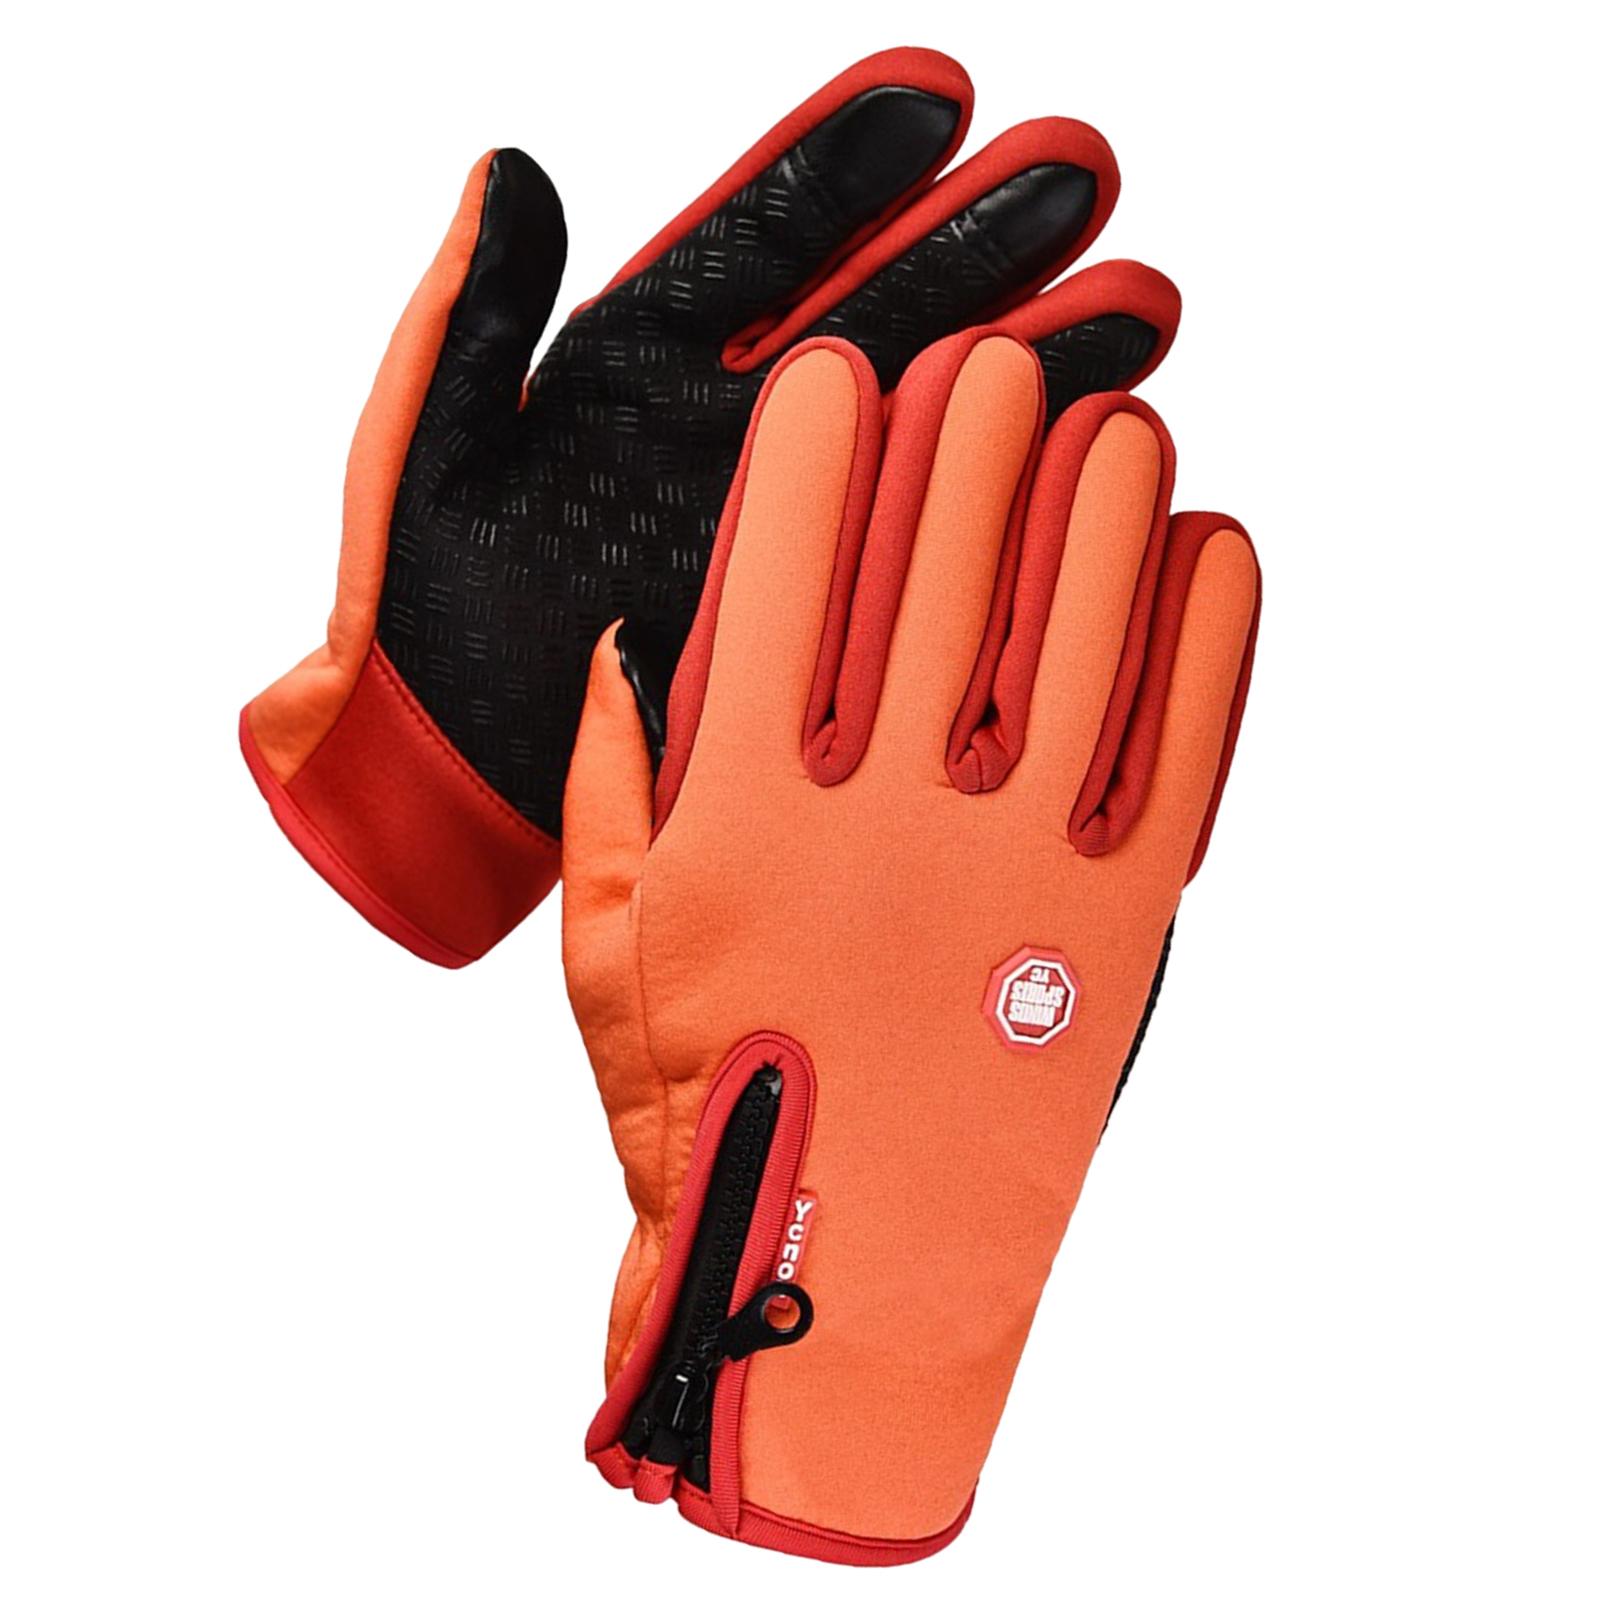 Winter Gloves Nonslip Thermal Gloves for Outdoor Running Sports Motorcycle Orange M